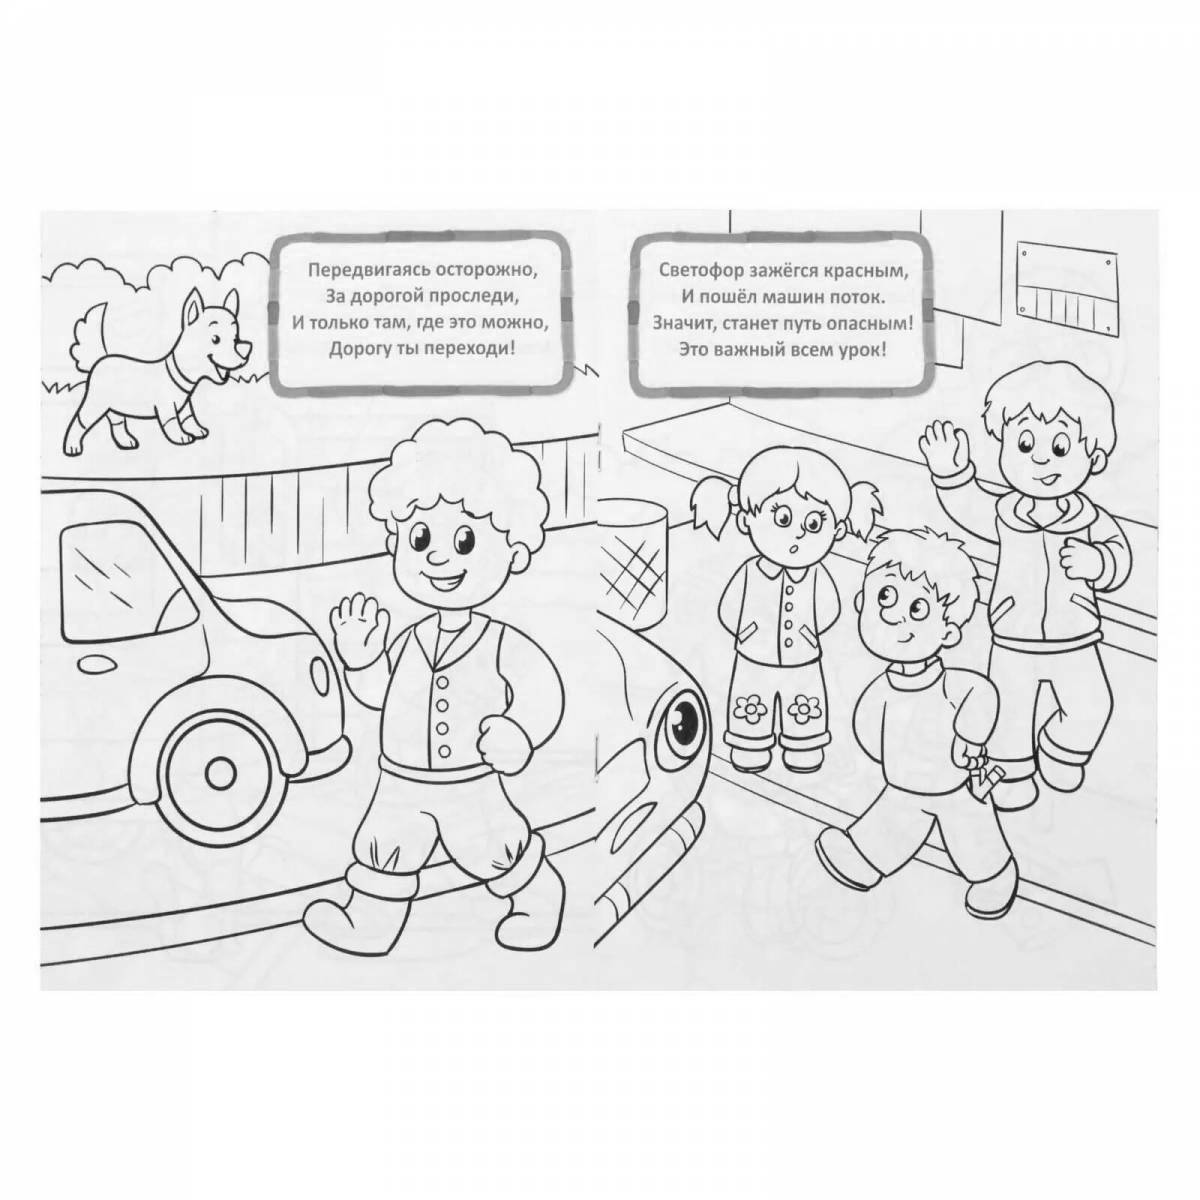 Attractive traffic safety page for preschoolers